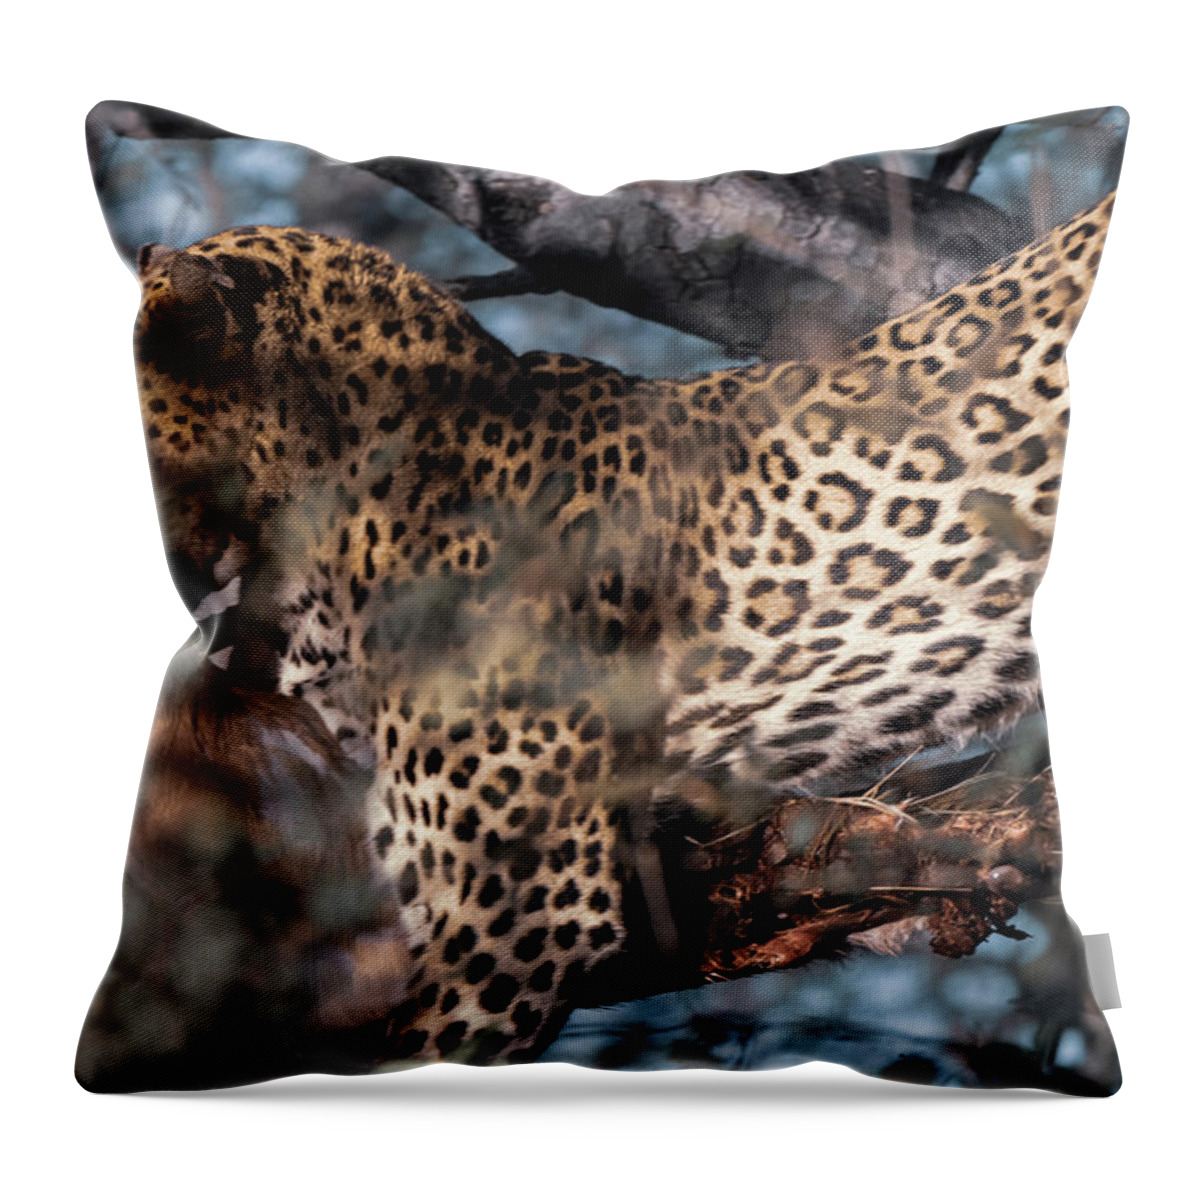  Throw Pillow featuring the photograph Leopard and Prey by Jermaine Beckley